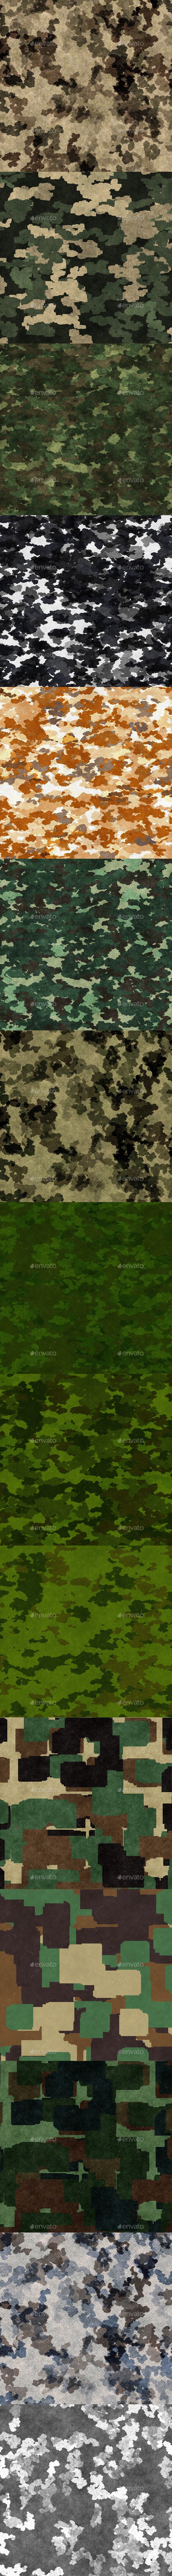 15 Tileable Camouflage Fabric Textures